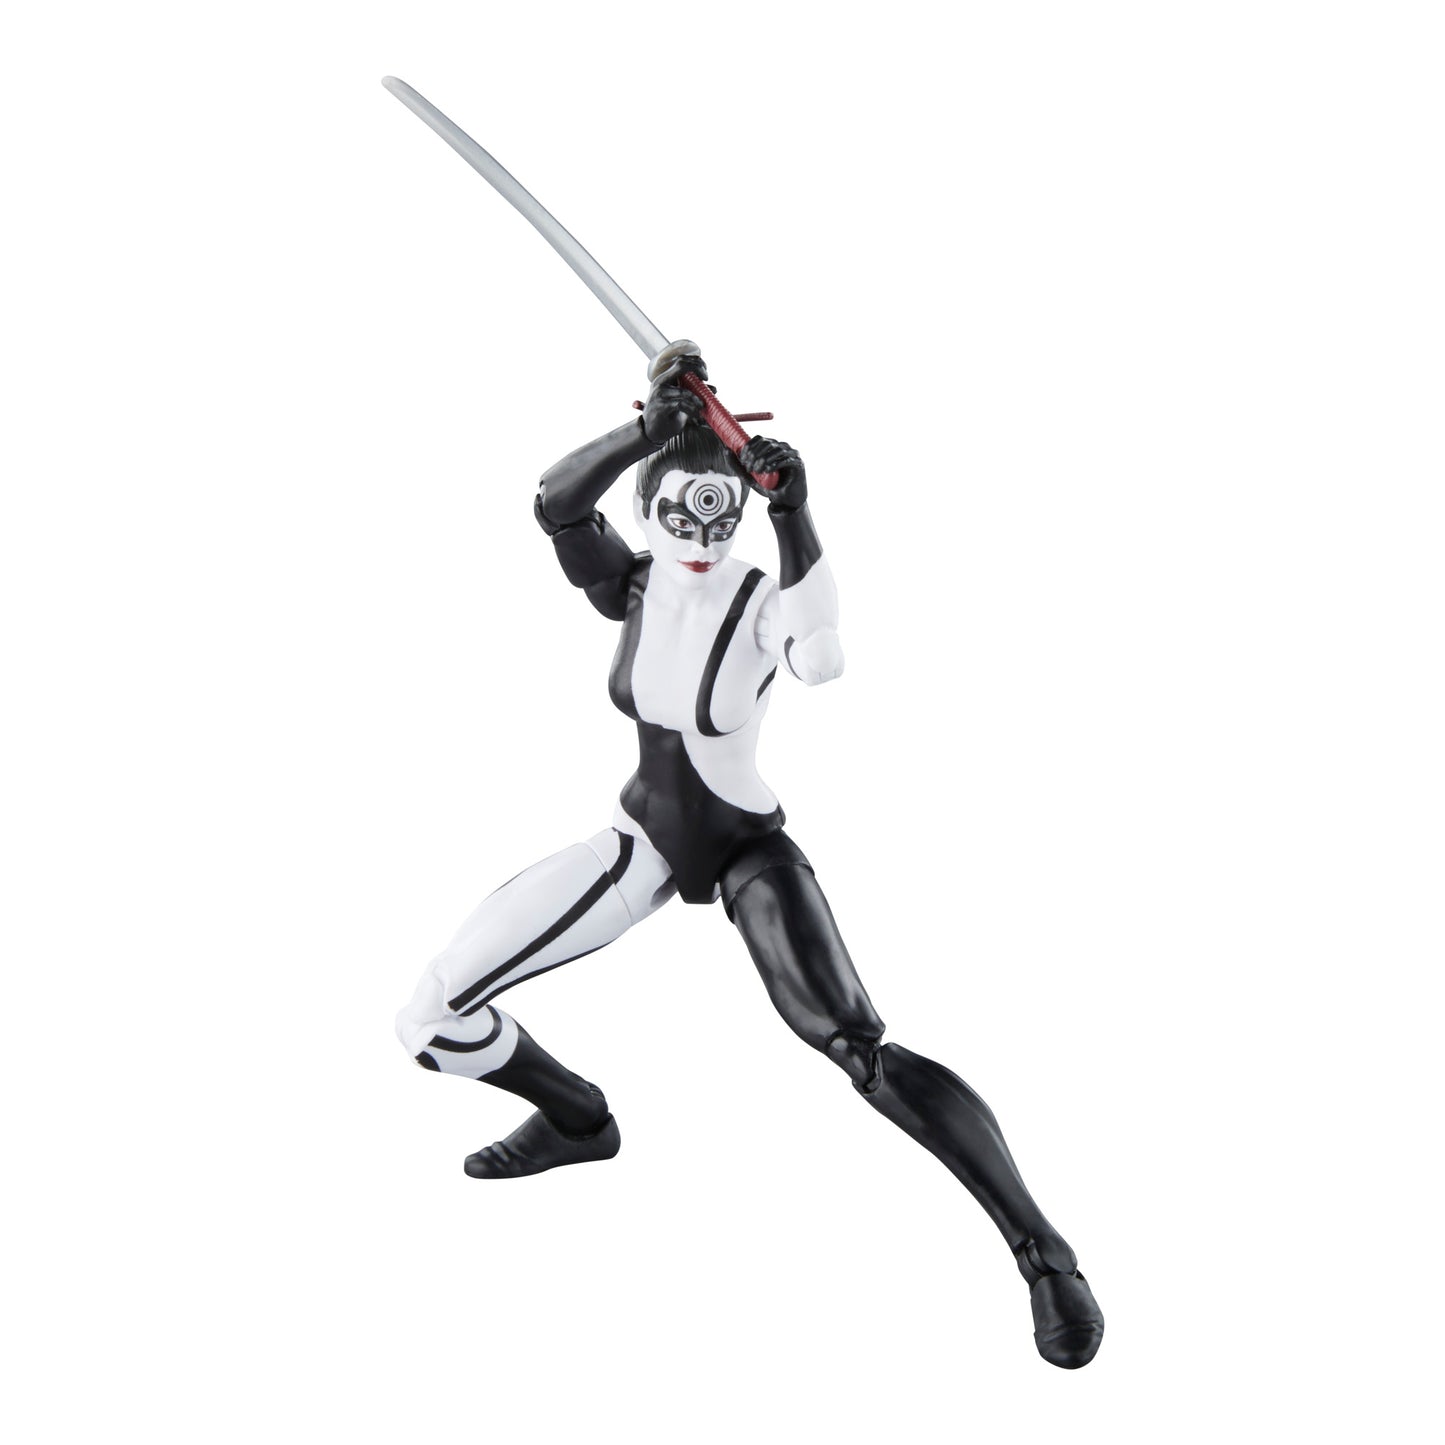 Hasbro Marvel Legends Series Marvel's Lady Bullseye Action Figure Toy in attack pose with sword - Heretoserveyou